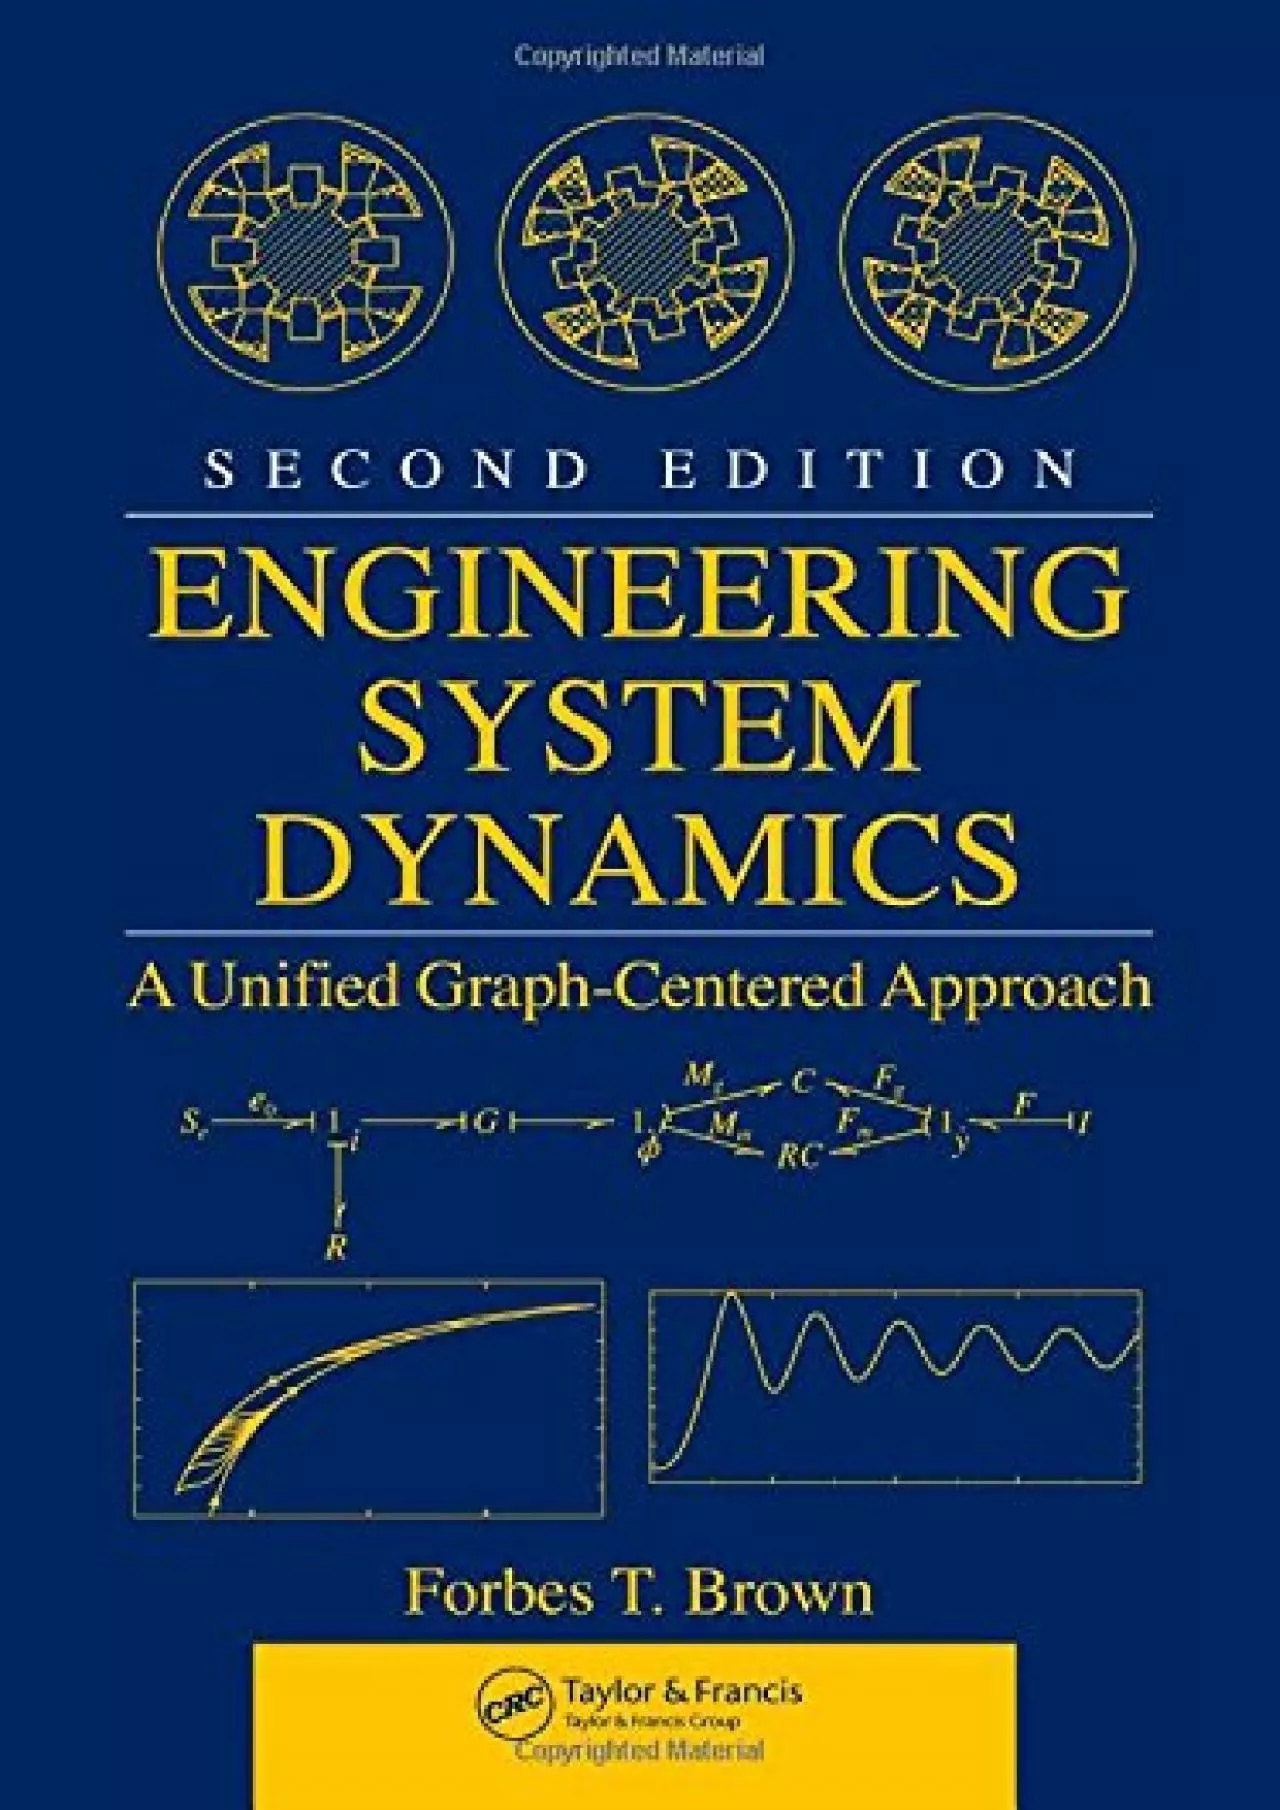 (BOOK)-Engineering System Dynamics: A Unified Graph-Centered Approach, Second Edition